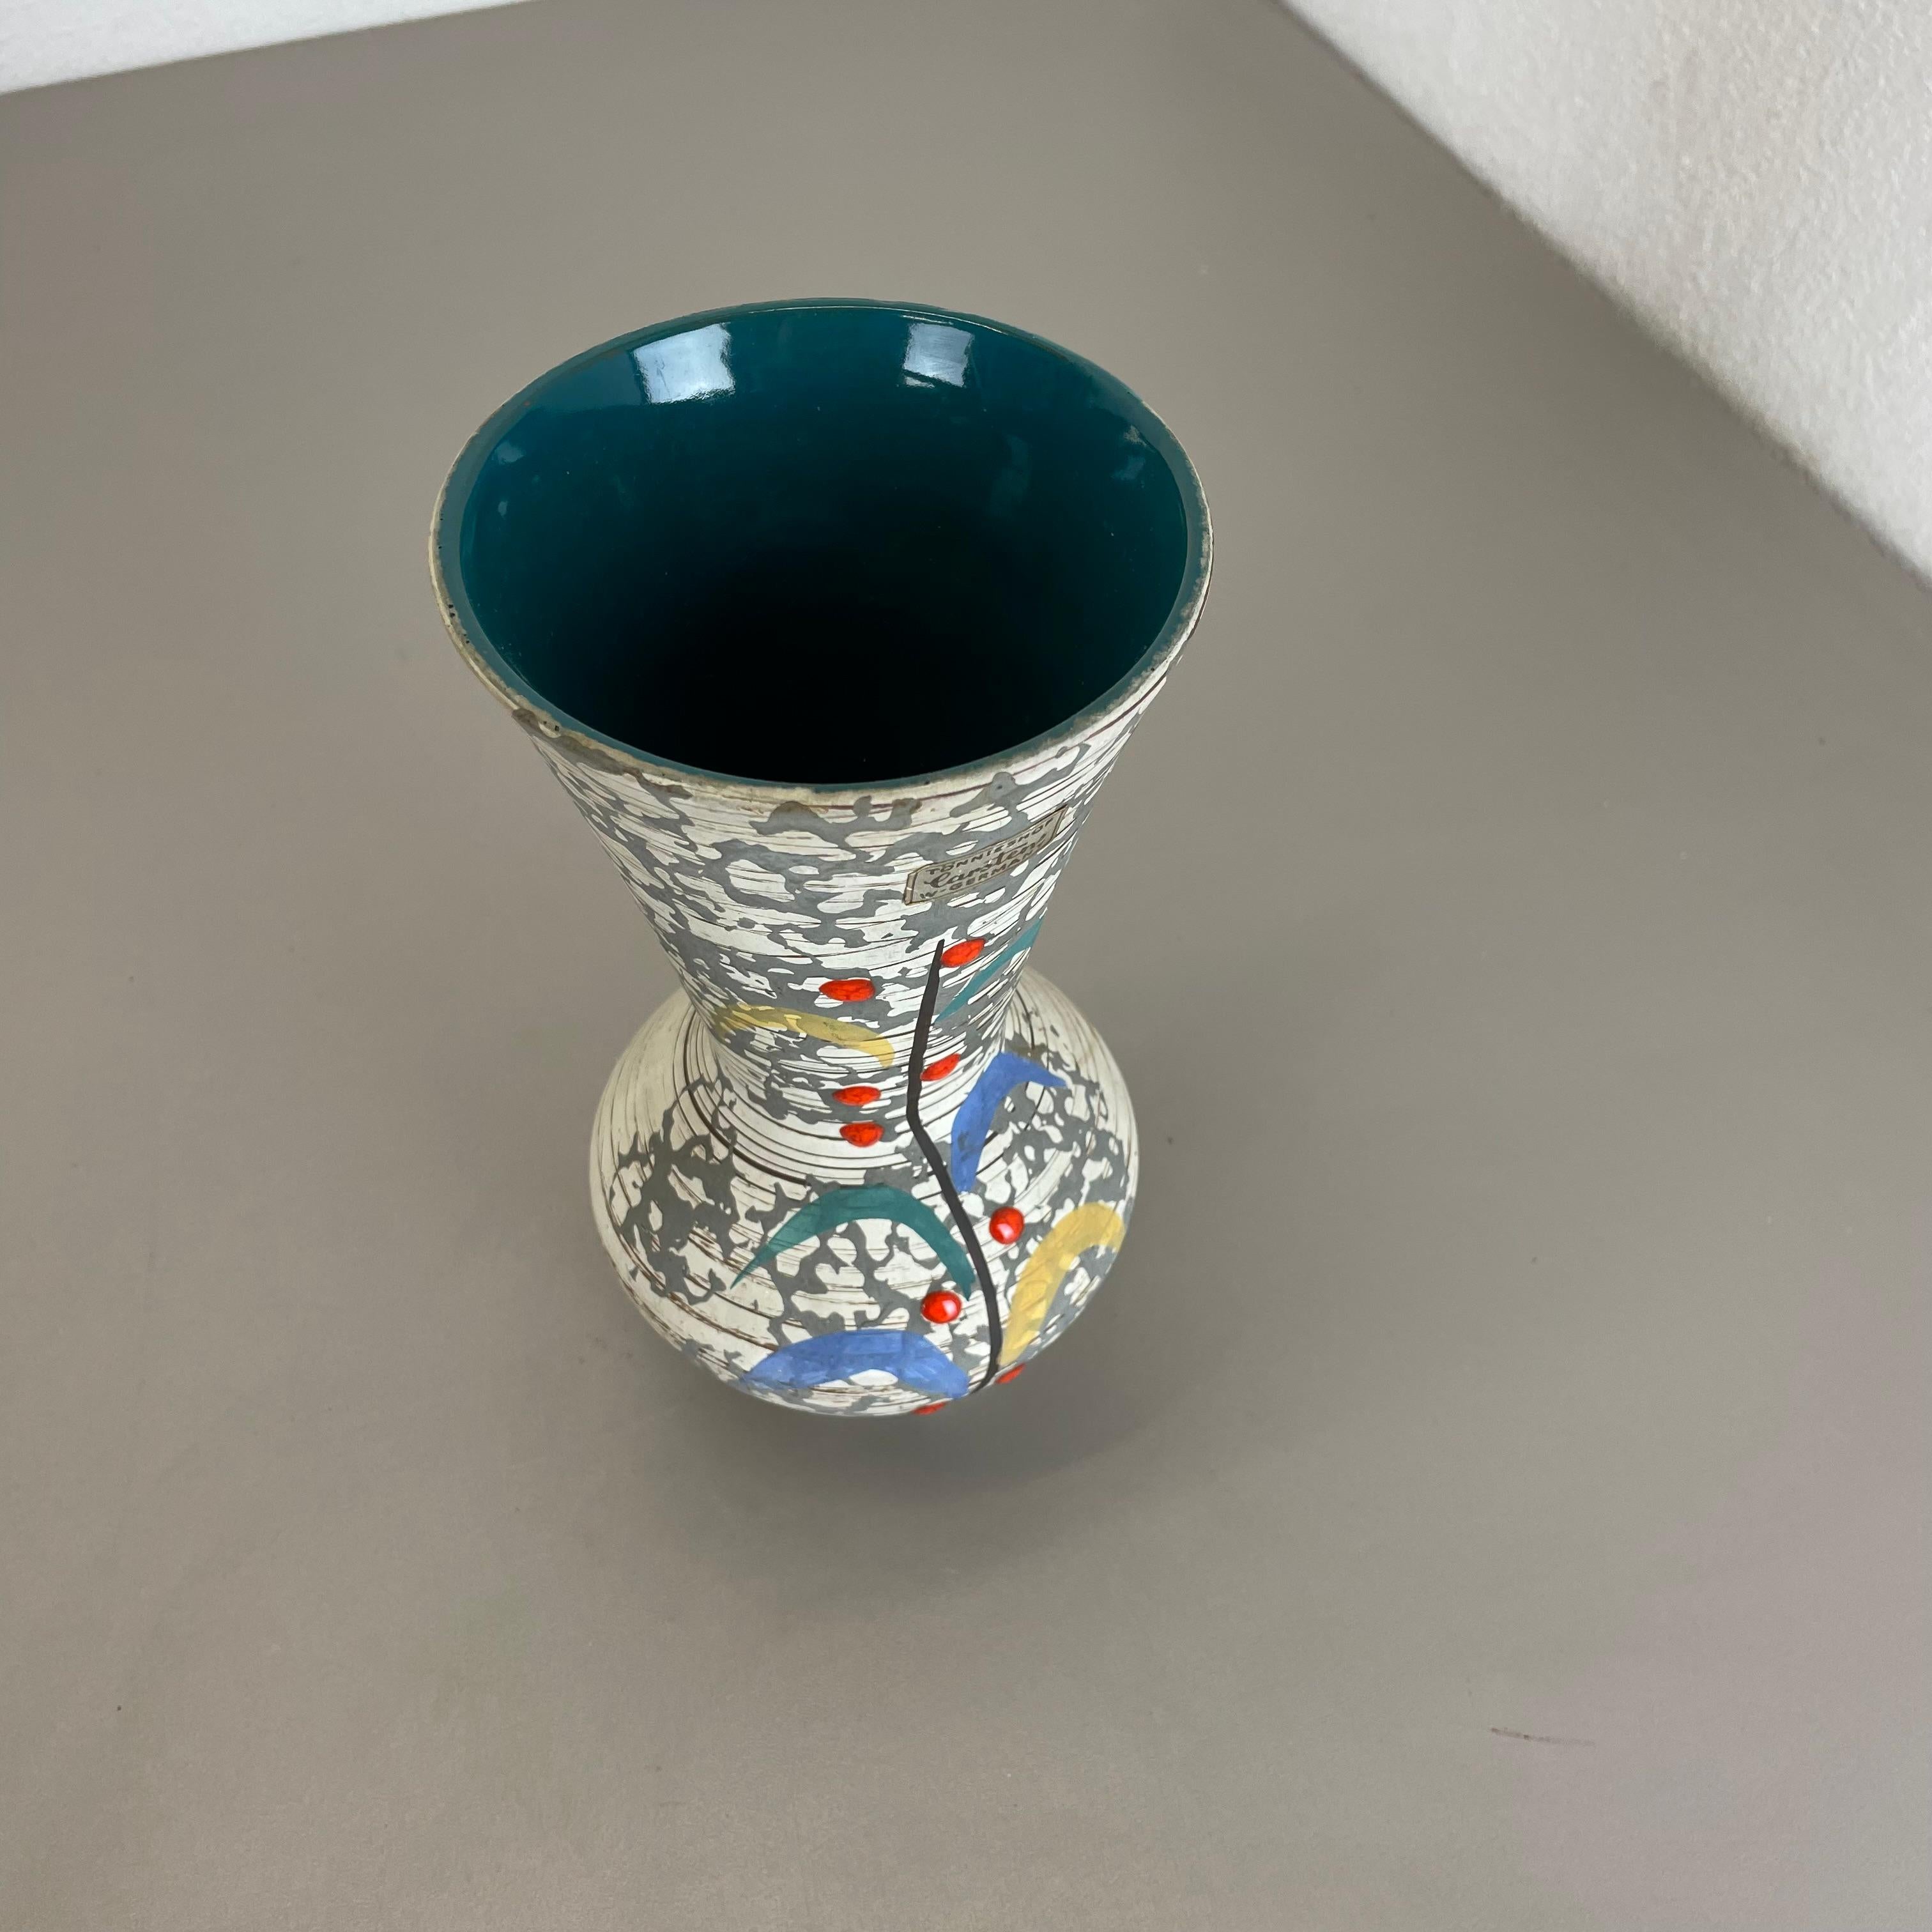 Super Glaze ABSTRACT Ceramic Pottery Vase Carstens Tönnieshof Germany, 1950s In Good Condition For Sale In Kirchlengern, DE